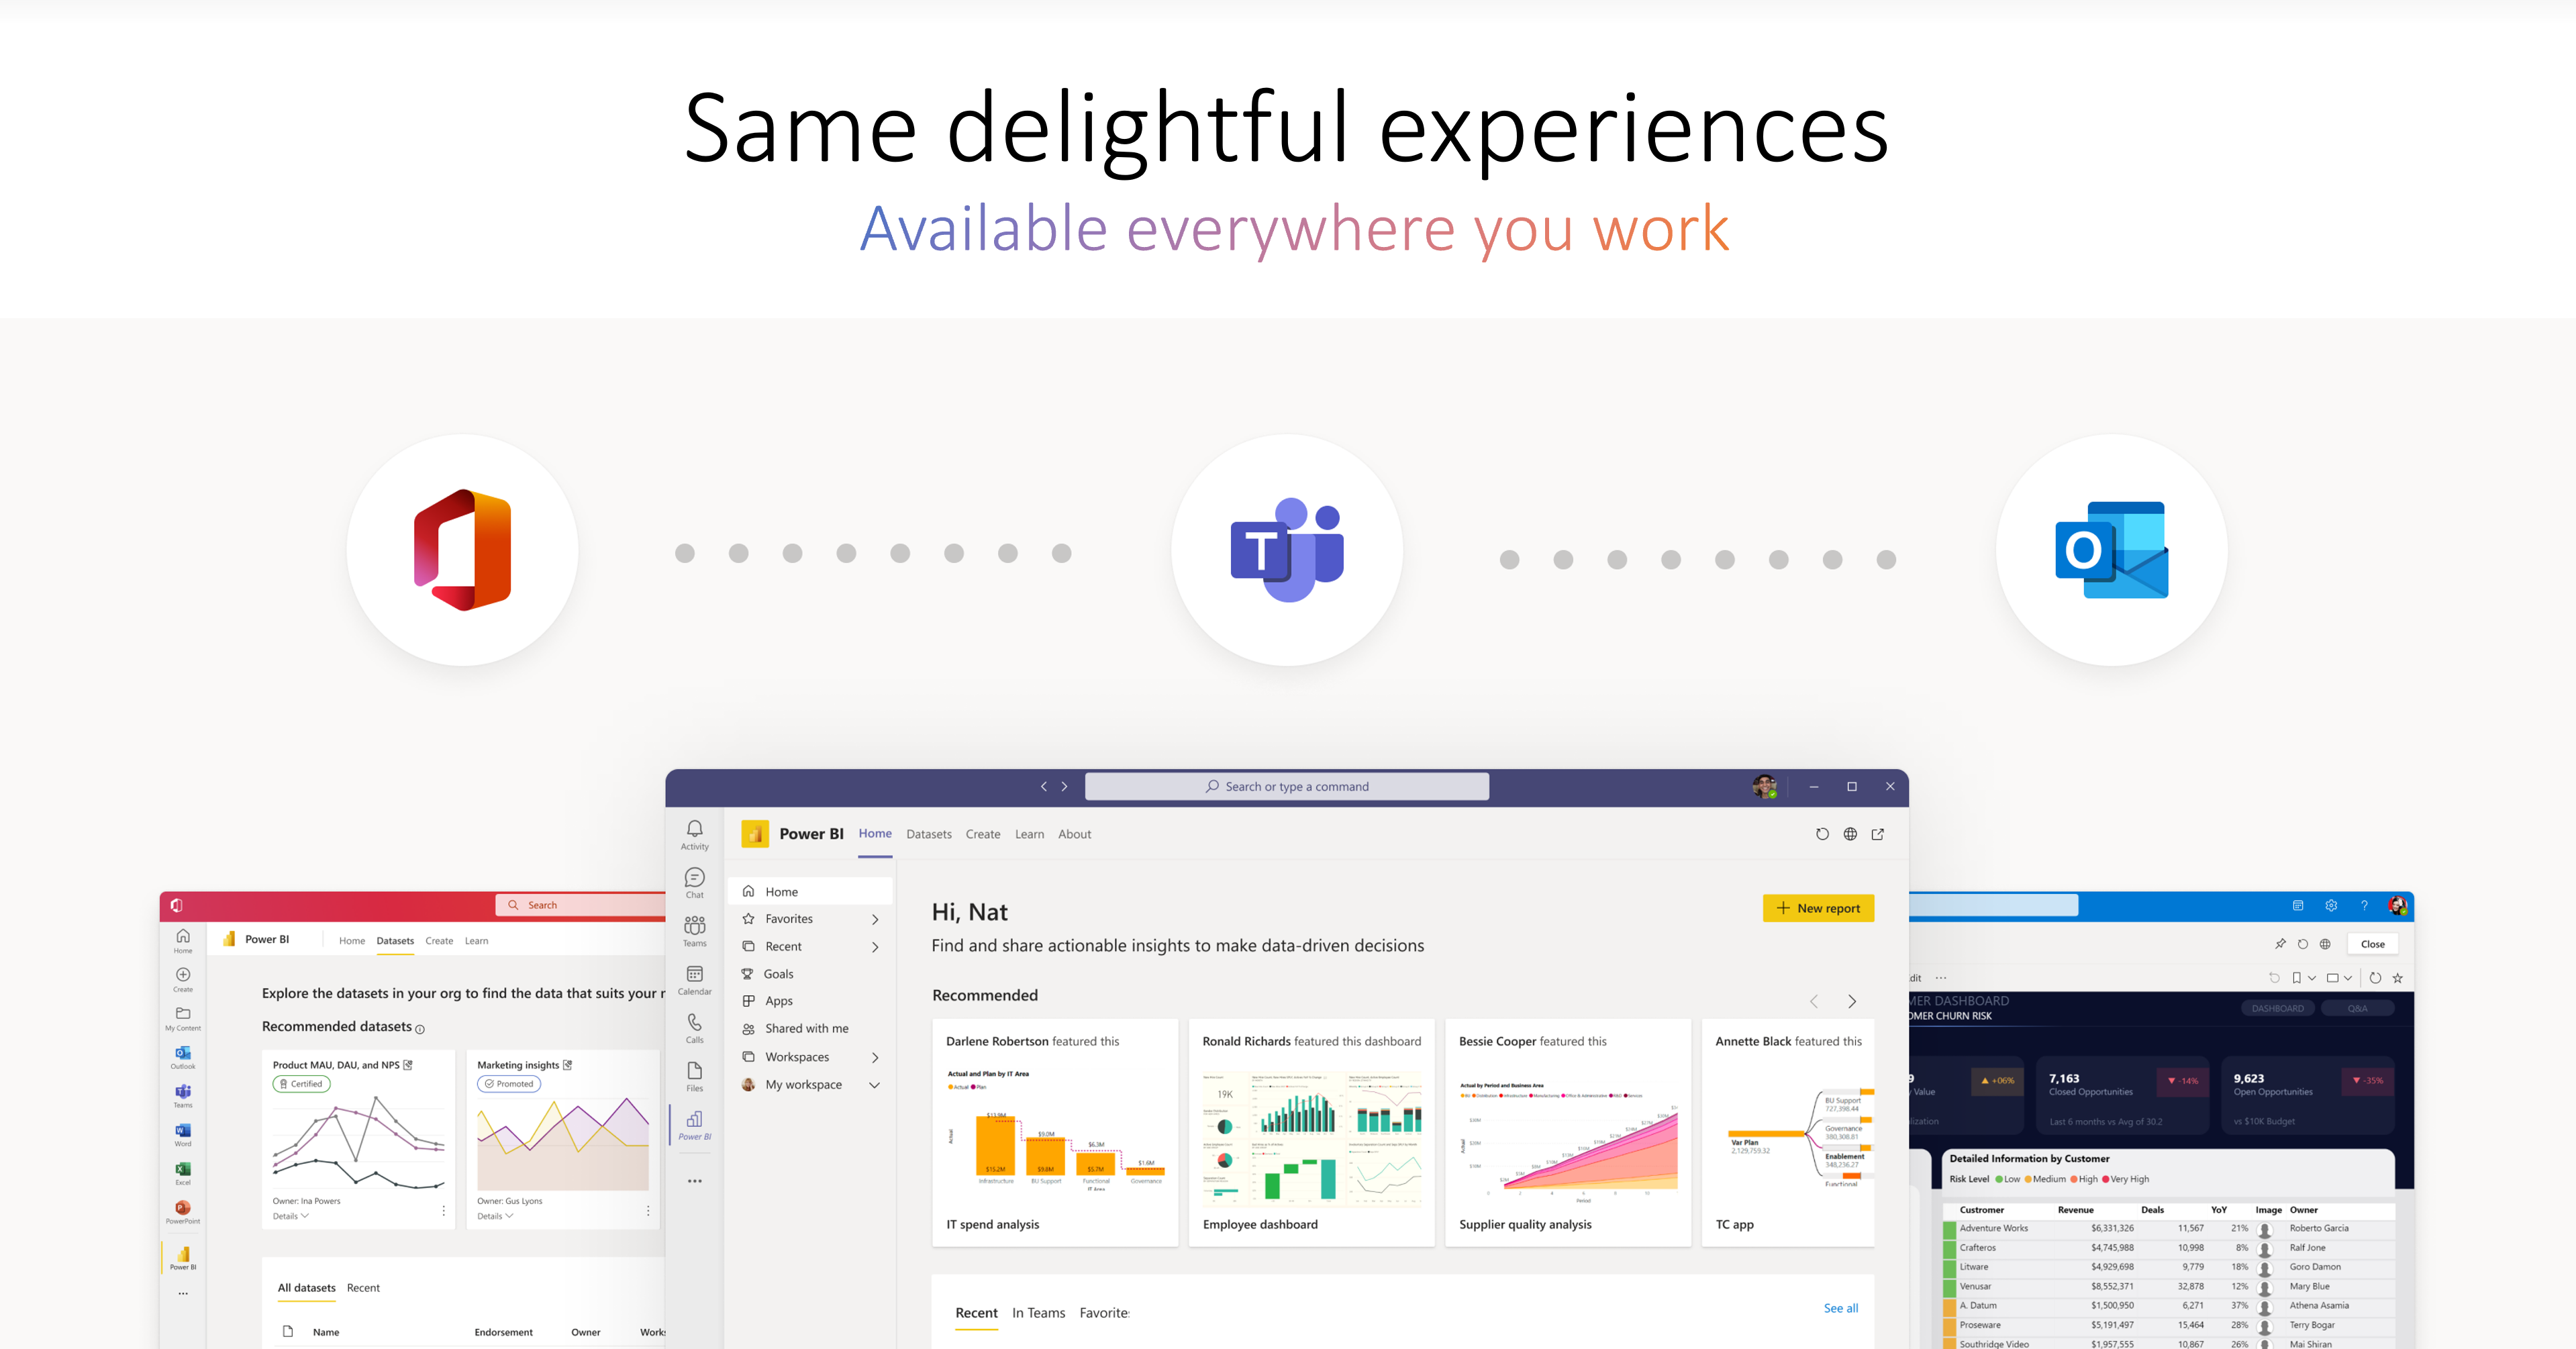 Illustration labeled “Same delightful experience available everywhere you work”. Displays the Microsoft Office, Microsoft Teams, and Microsoft Outlook icons, and beneath them are screenshots of Power BI in Office, Teams, and Outlook.